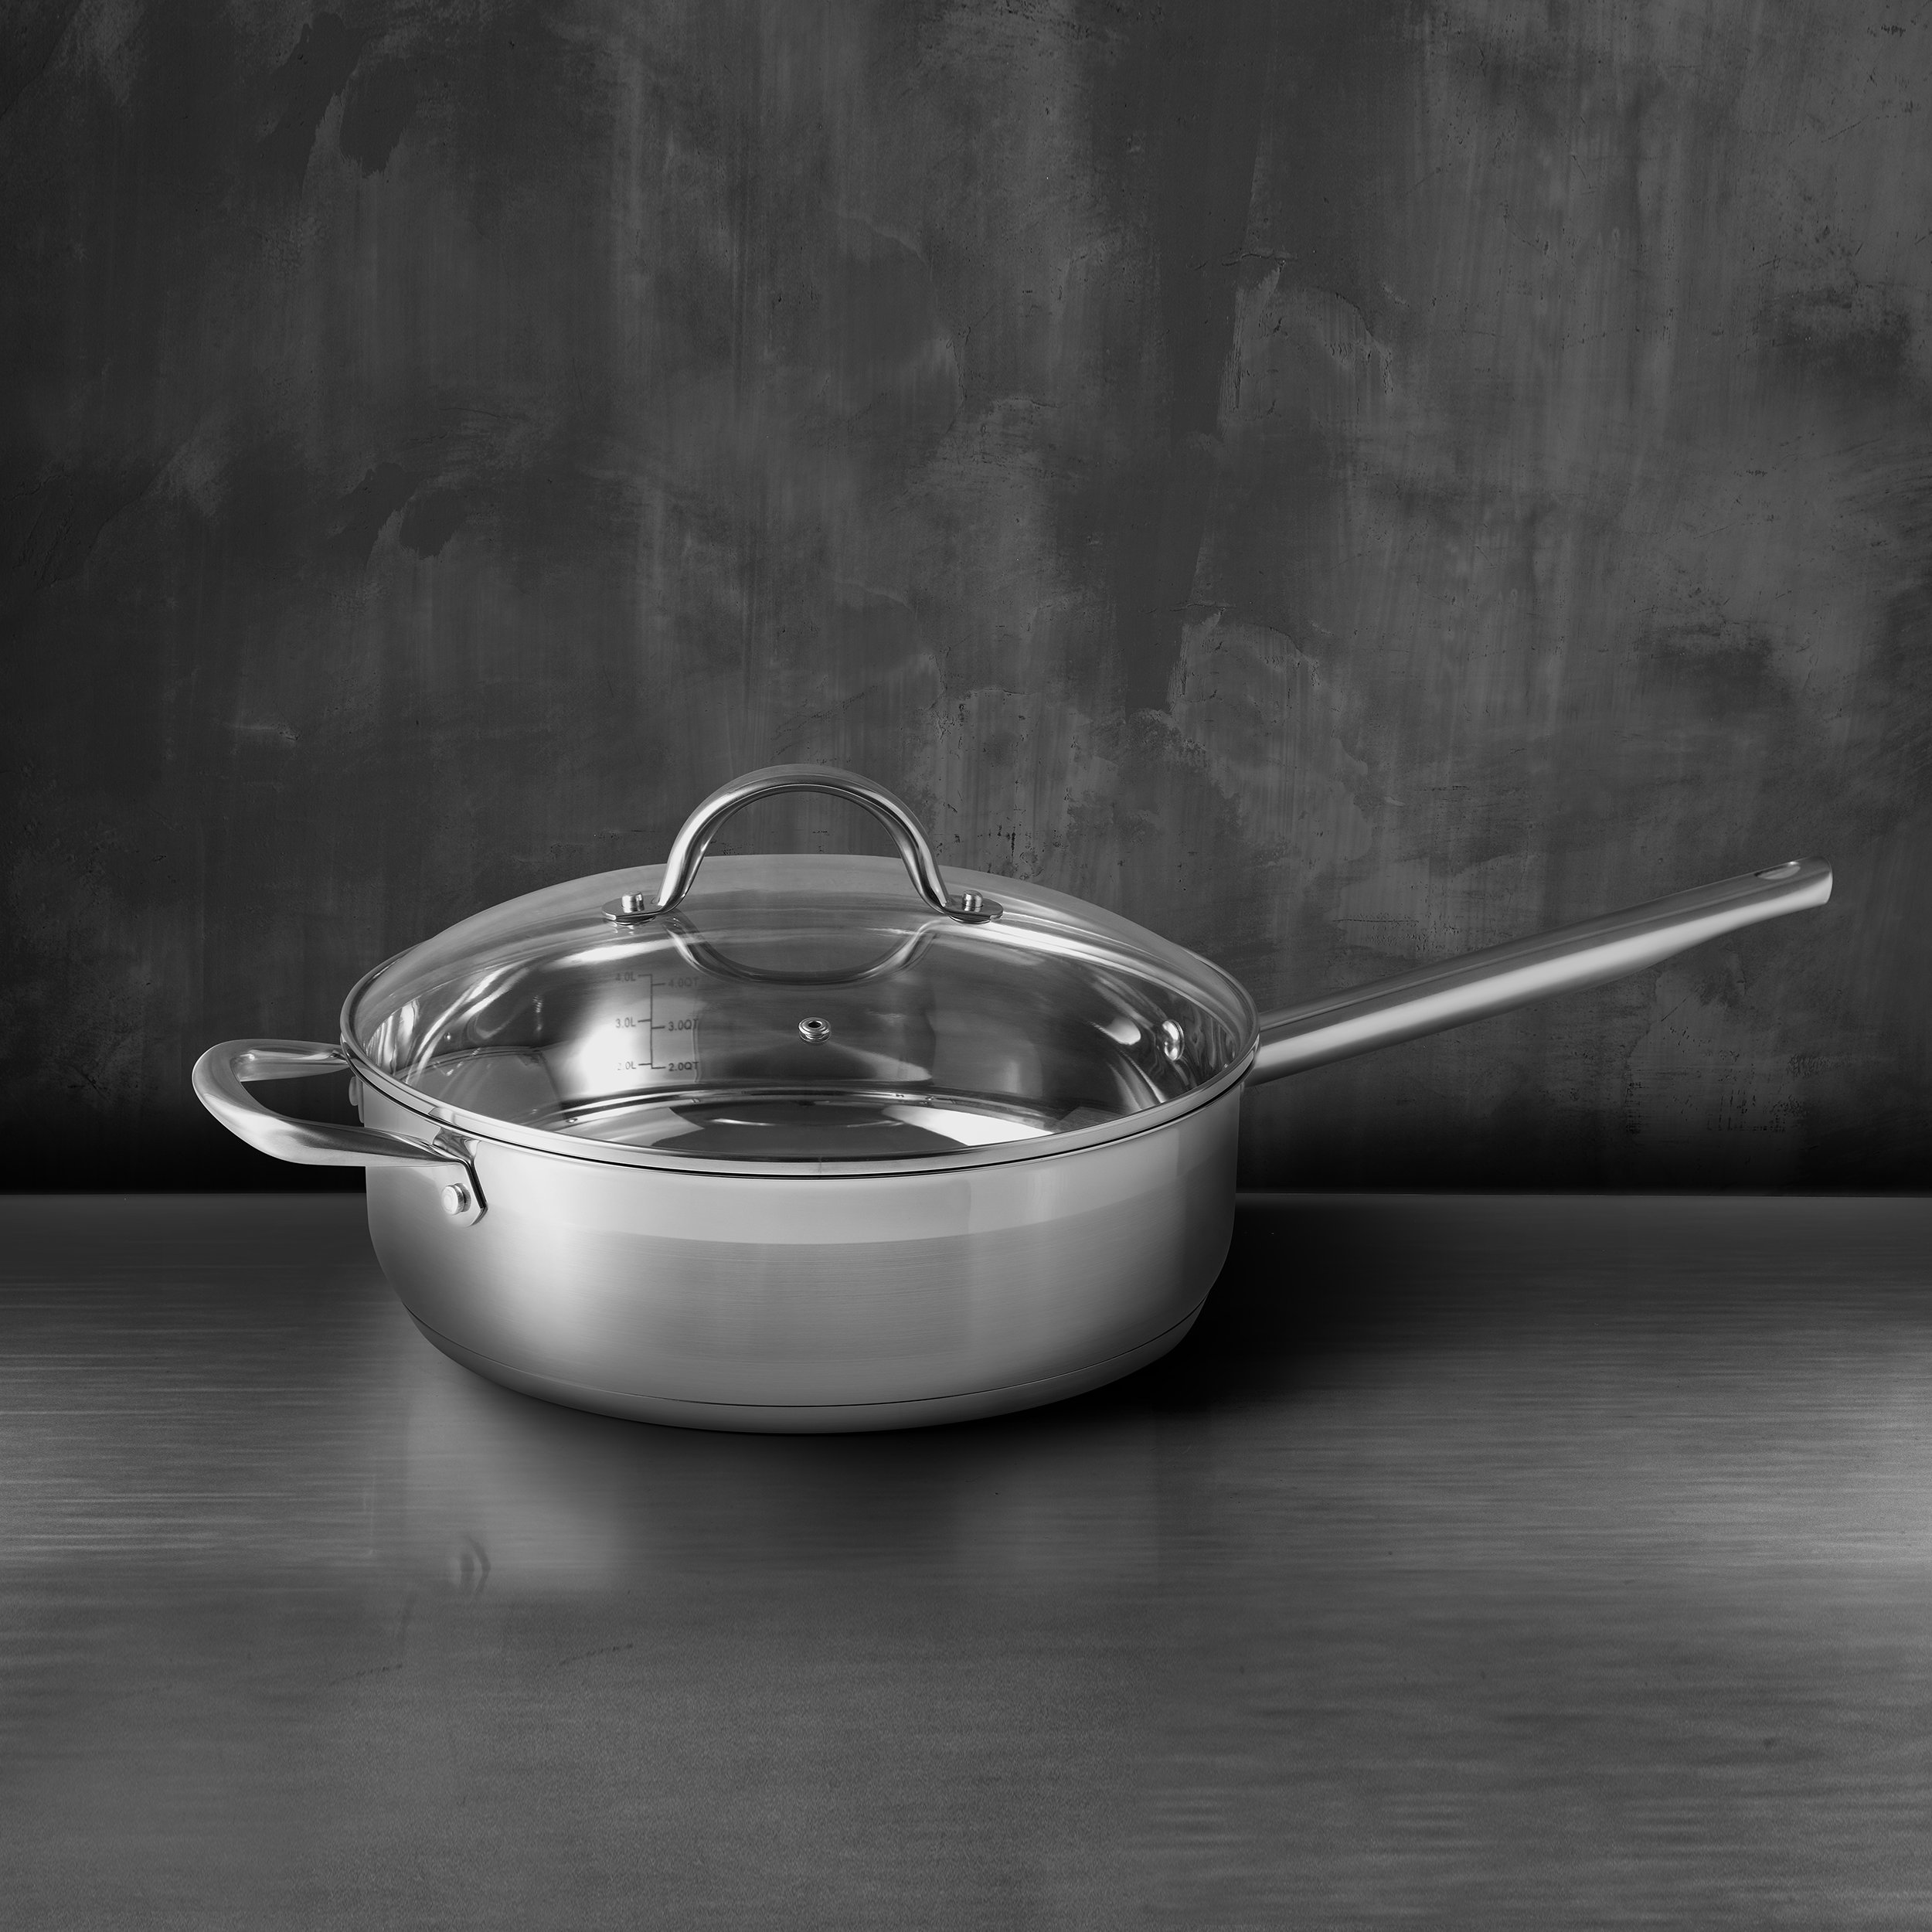 5 Quarts Stainless Steel Sauteuse Pan with Lid